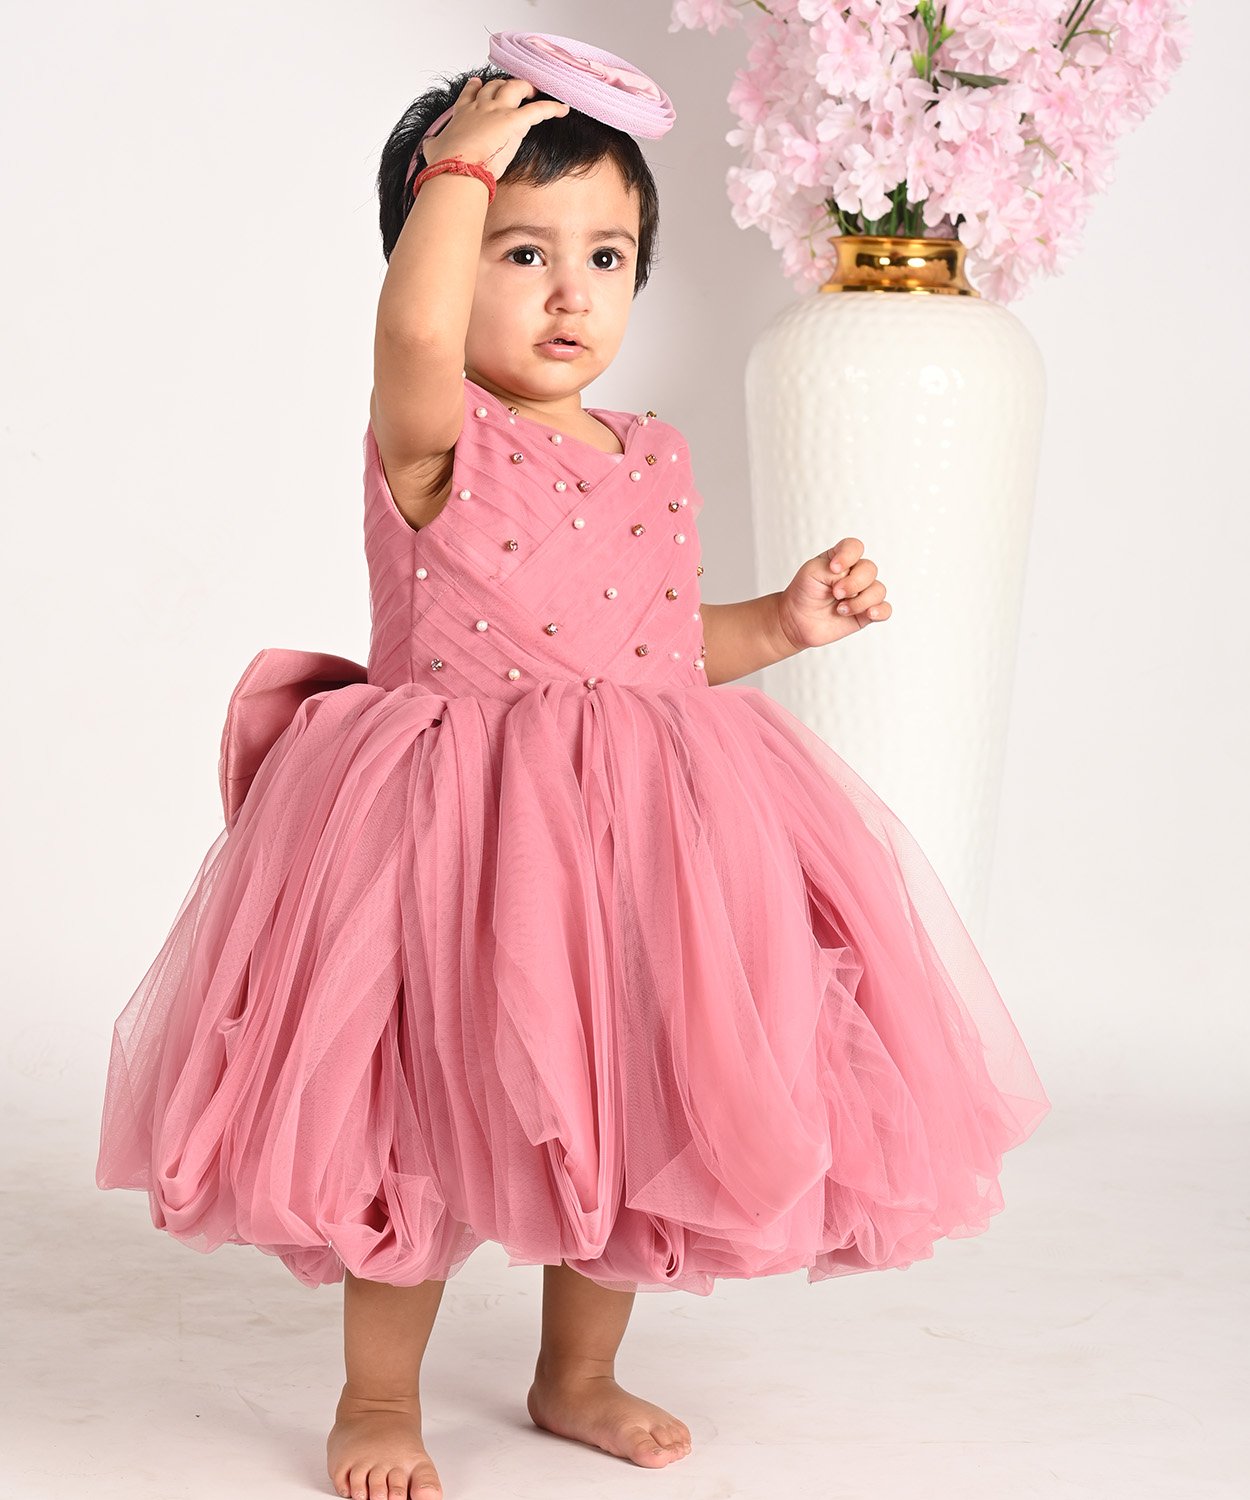 Pink Dress With  Acrisscross Bodice With Sparkling Accents